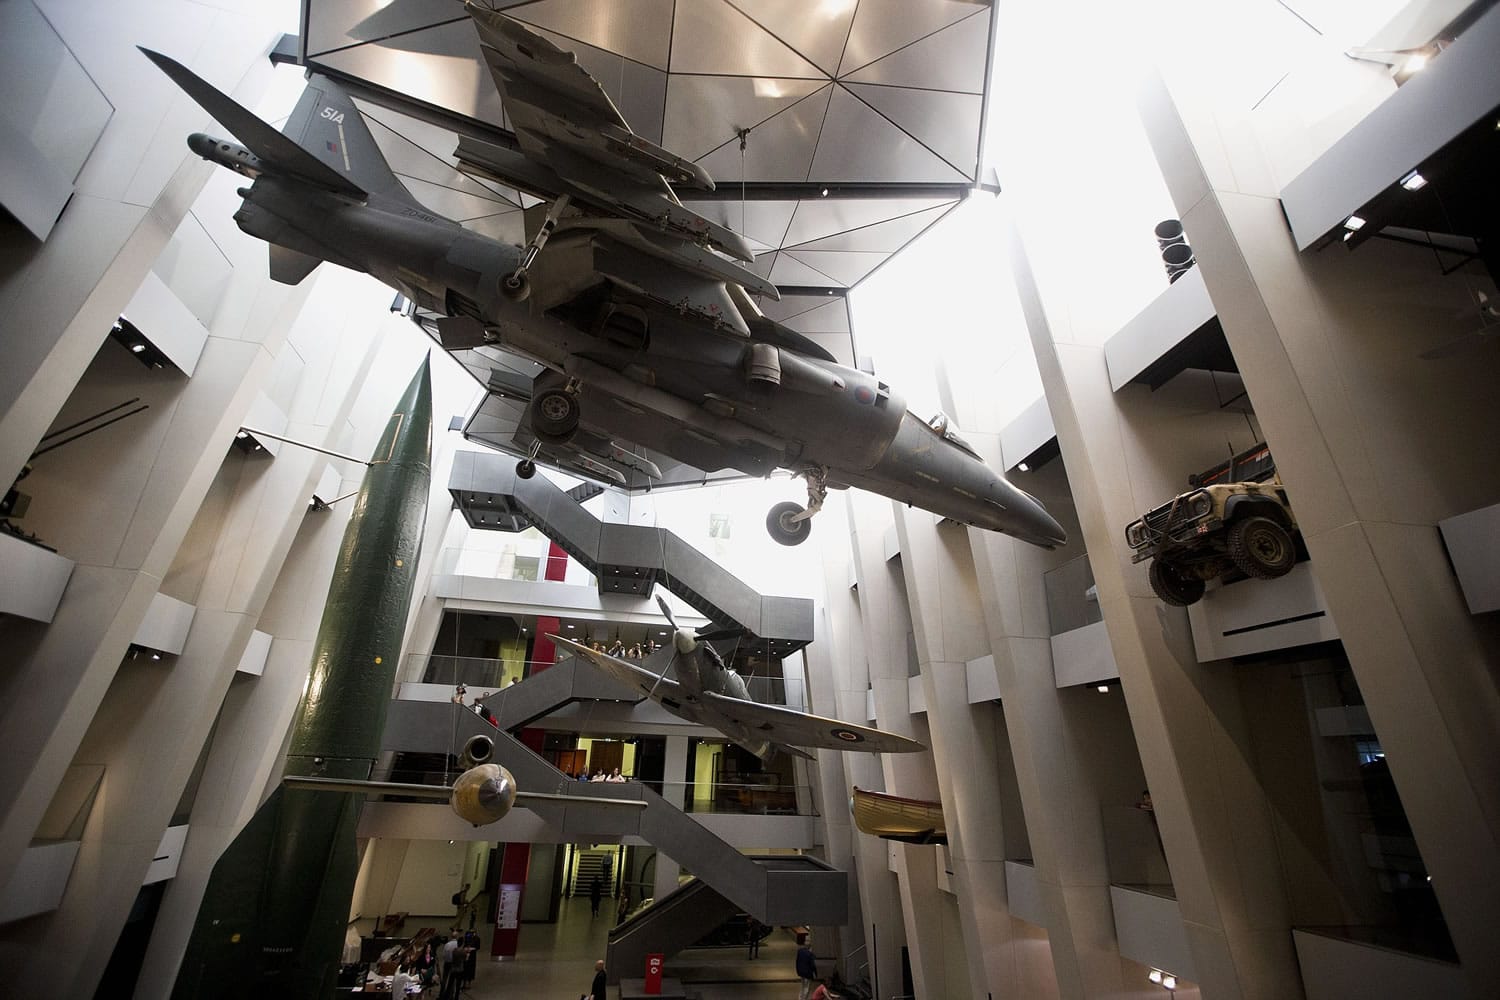 Military exhibits are displayed in the newly transformed atrium after major redevelopment works at the Imperial War Museum in London, Wednesday, July 16, 2014.  The museum reopens Saturday after a six-month closure for a 40 million pound ($70 million) renovation timed to mark the centenary of World War I.  The museum was founded in 1917, as the war still raged, to preserve the stories of those who were fighting and dying. It retains that goal, as well its archaic name, relic of a long-gone British Empire.